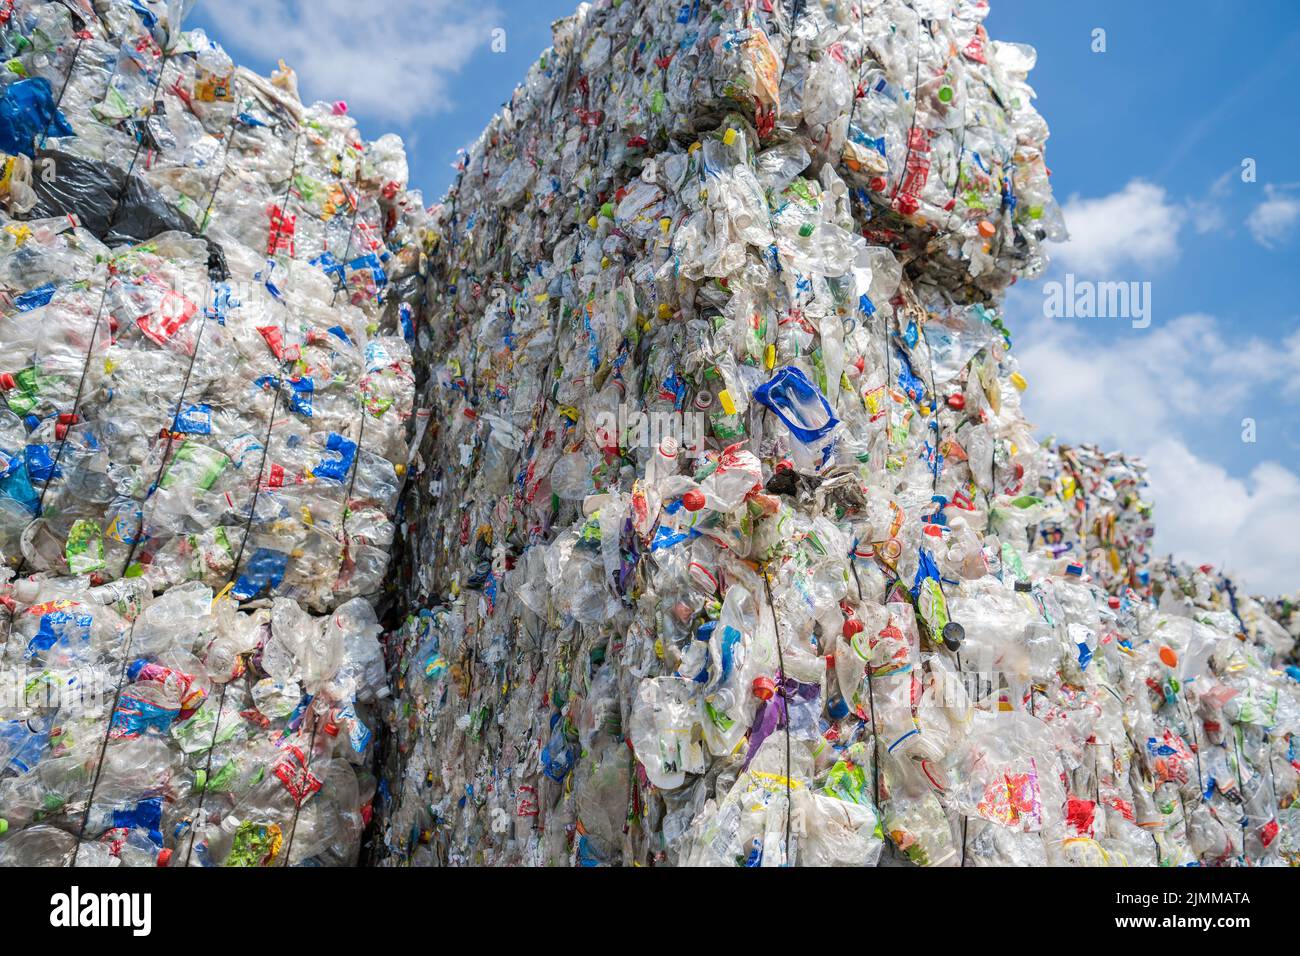 Collected Compacted and Ready For Recycling Process Plastic PET Bottles. Piles of Plastic Waste For Reprocessing. Stock Photo